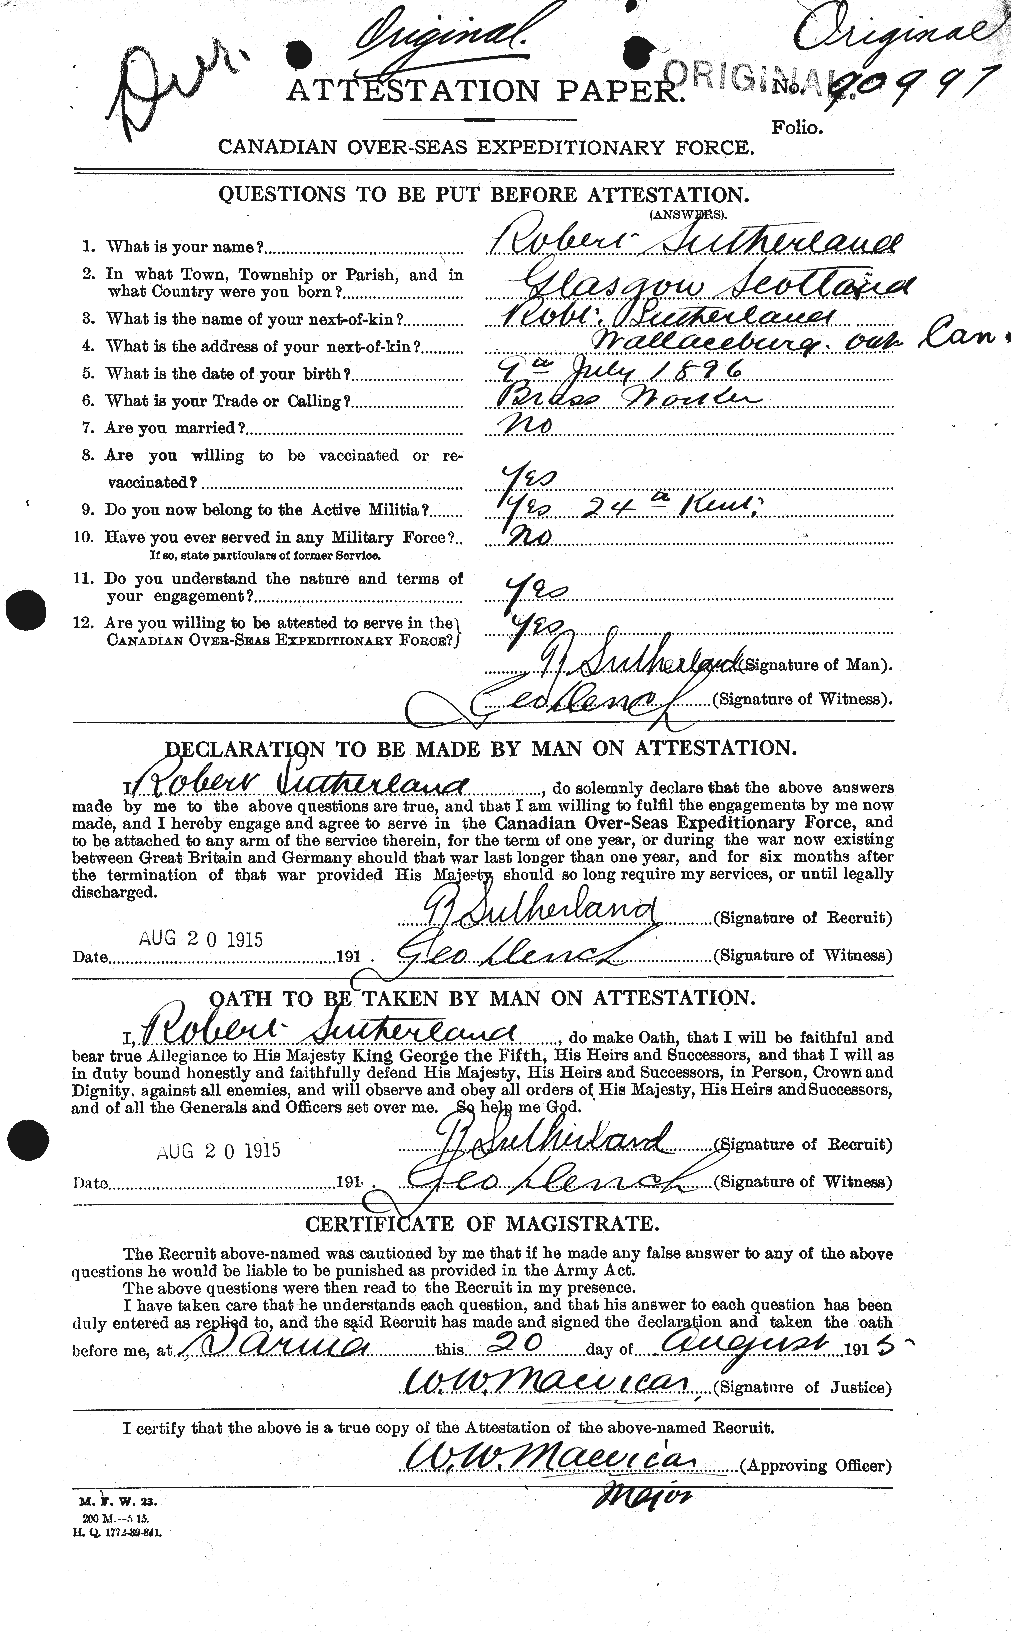 Personnel Records of the First World War - CEF 126806a